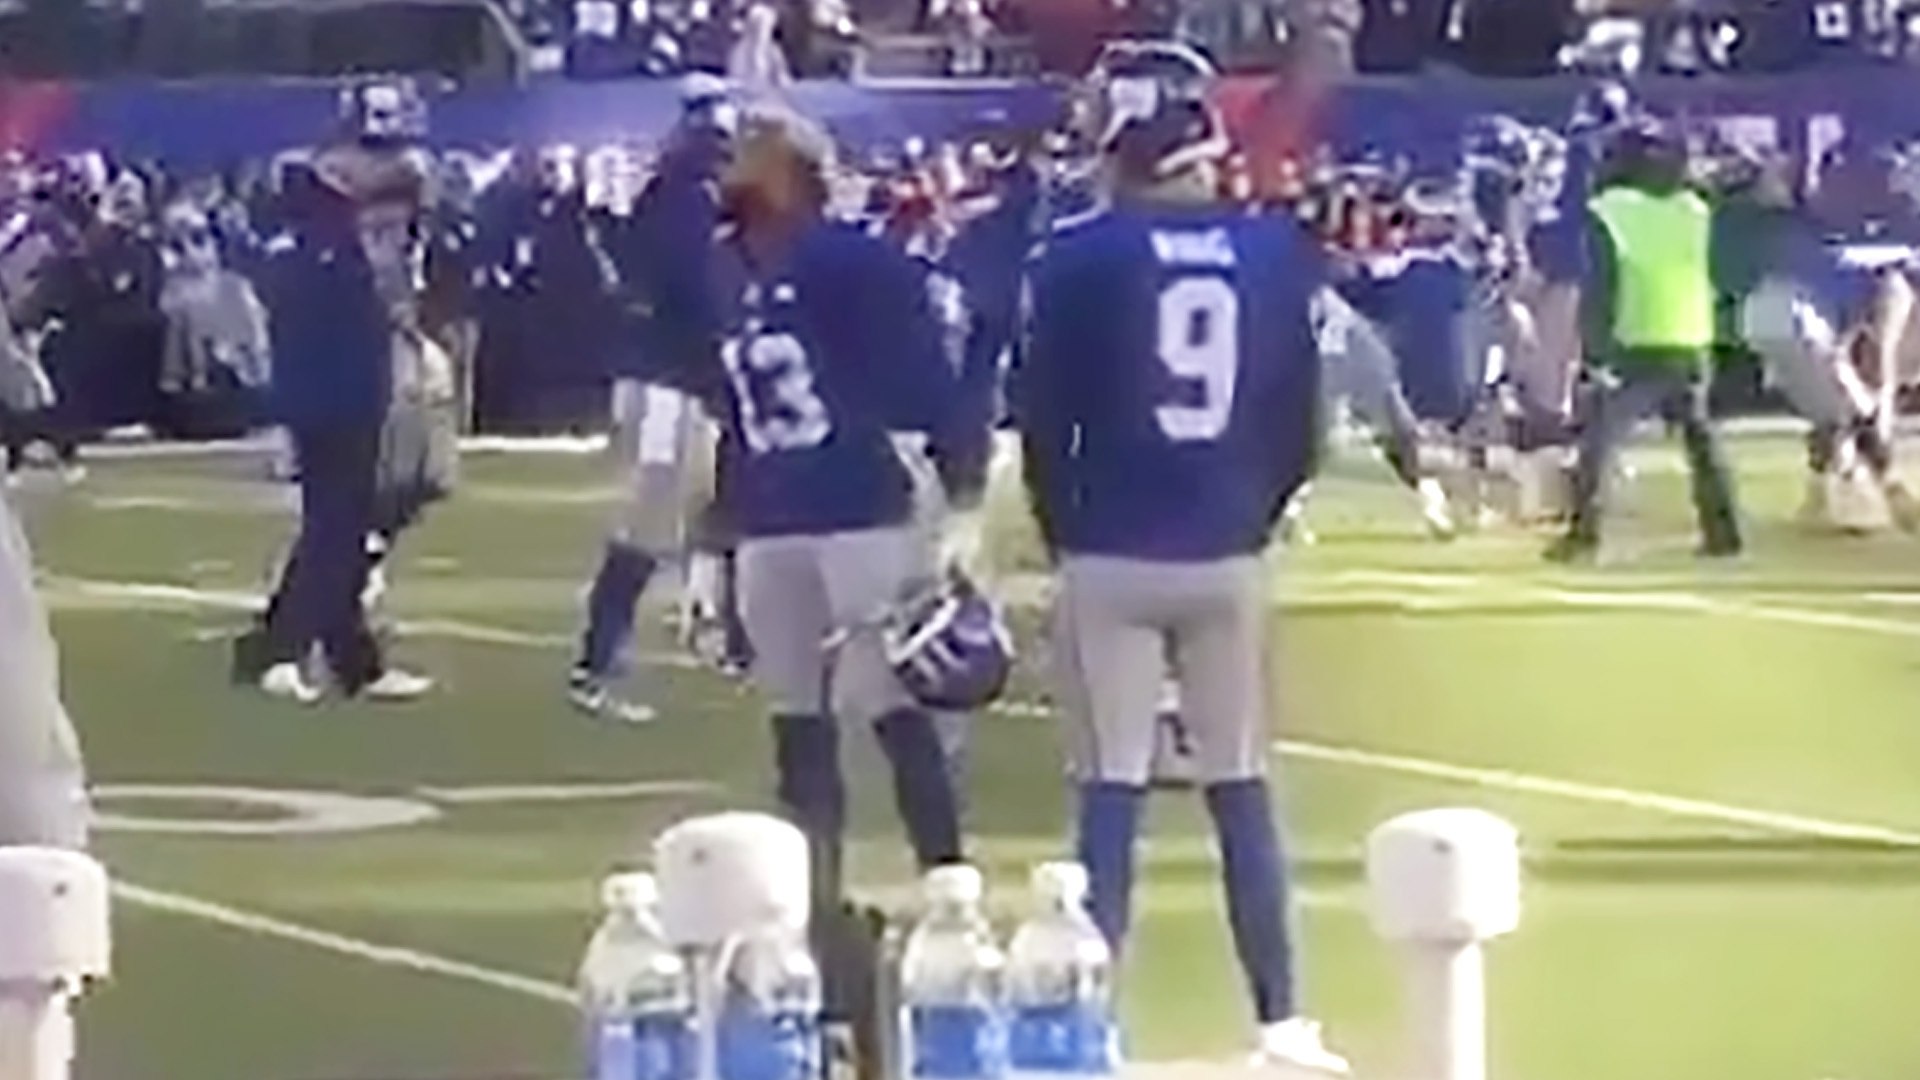 Panthers Player Allegedly Threatened Odell Beckham Jr. Before Giants-Panthers Game